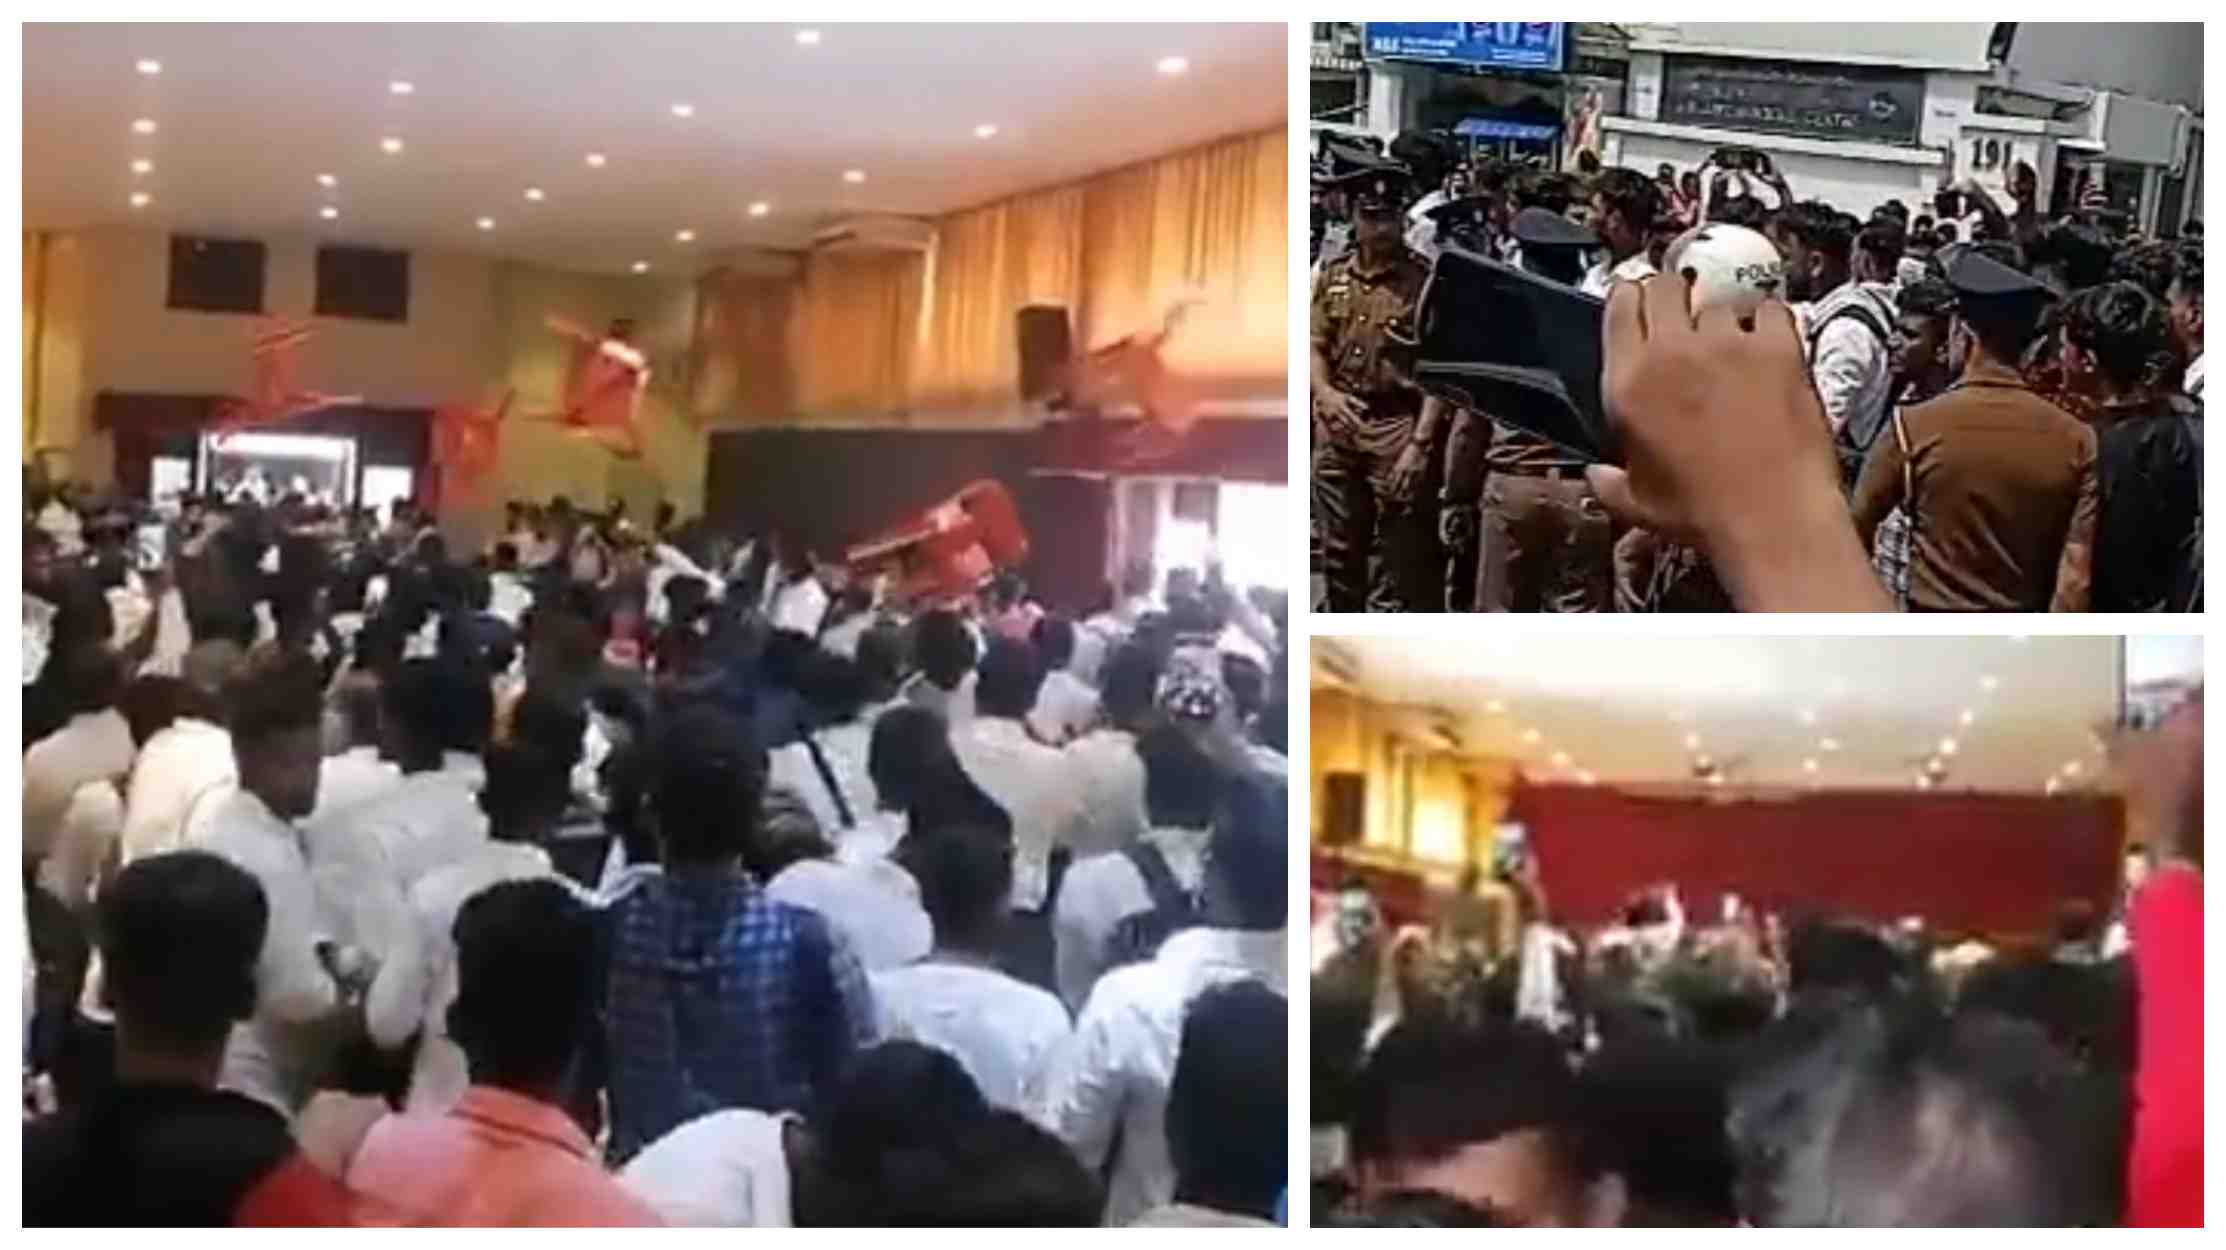 Tense situ after hundreds attend free fake Turkey job interview in Colombo